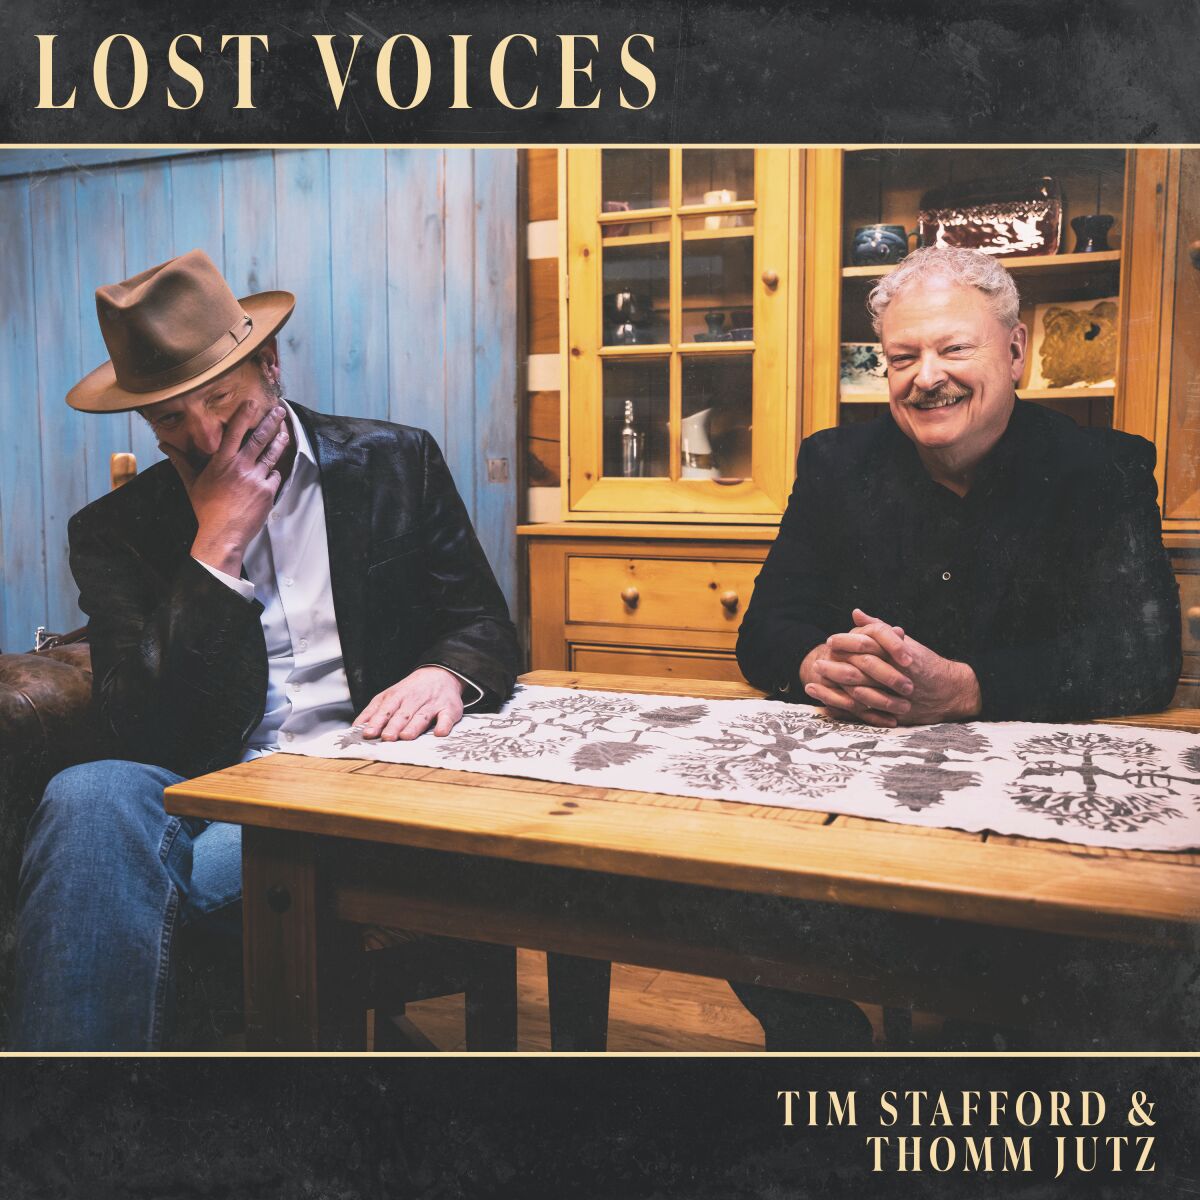 This cover image released by Mountain Fever shows “Lost Voices,” by Tim Stafford and Thomm Jutz. (Mountain Fever via AP)